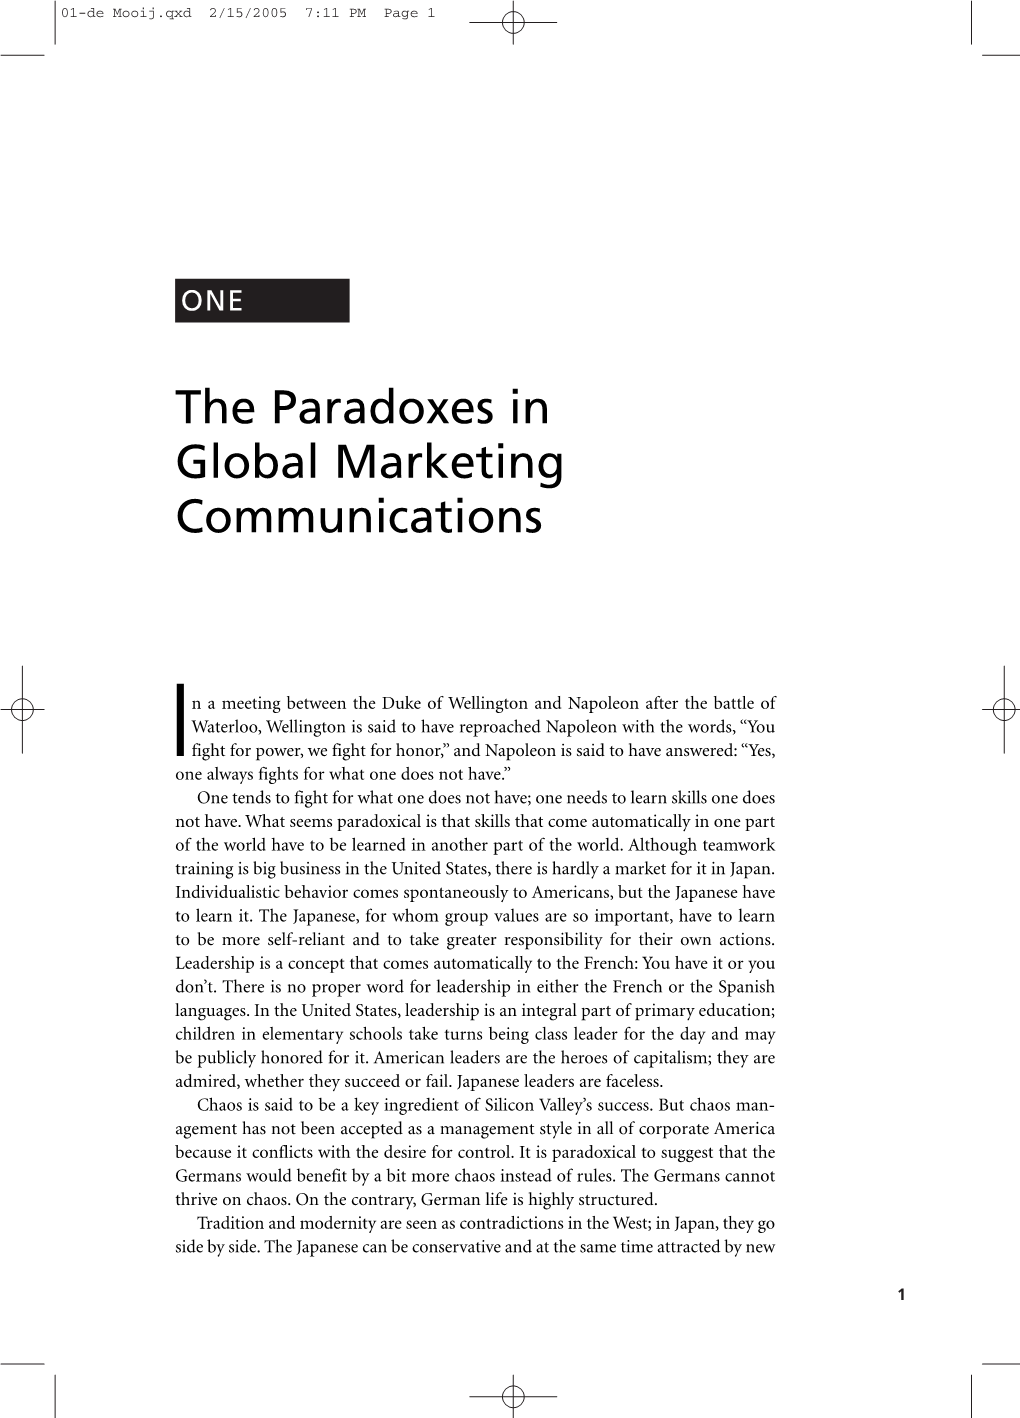 The Paradoxes in Global Marketing Communications